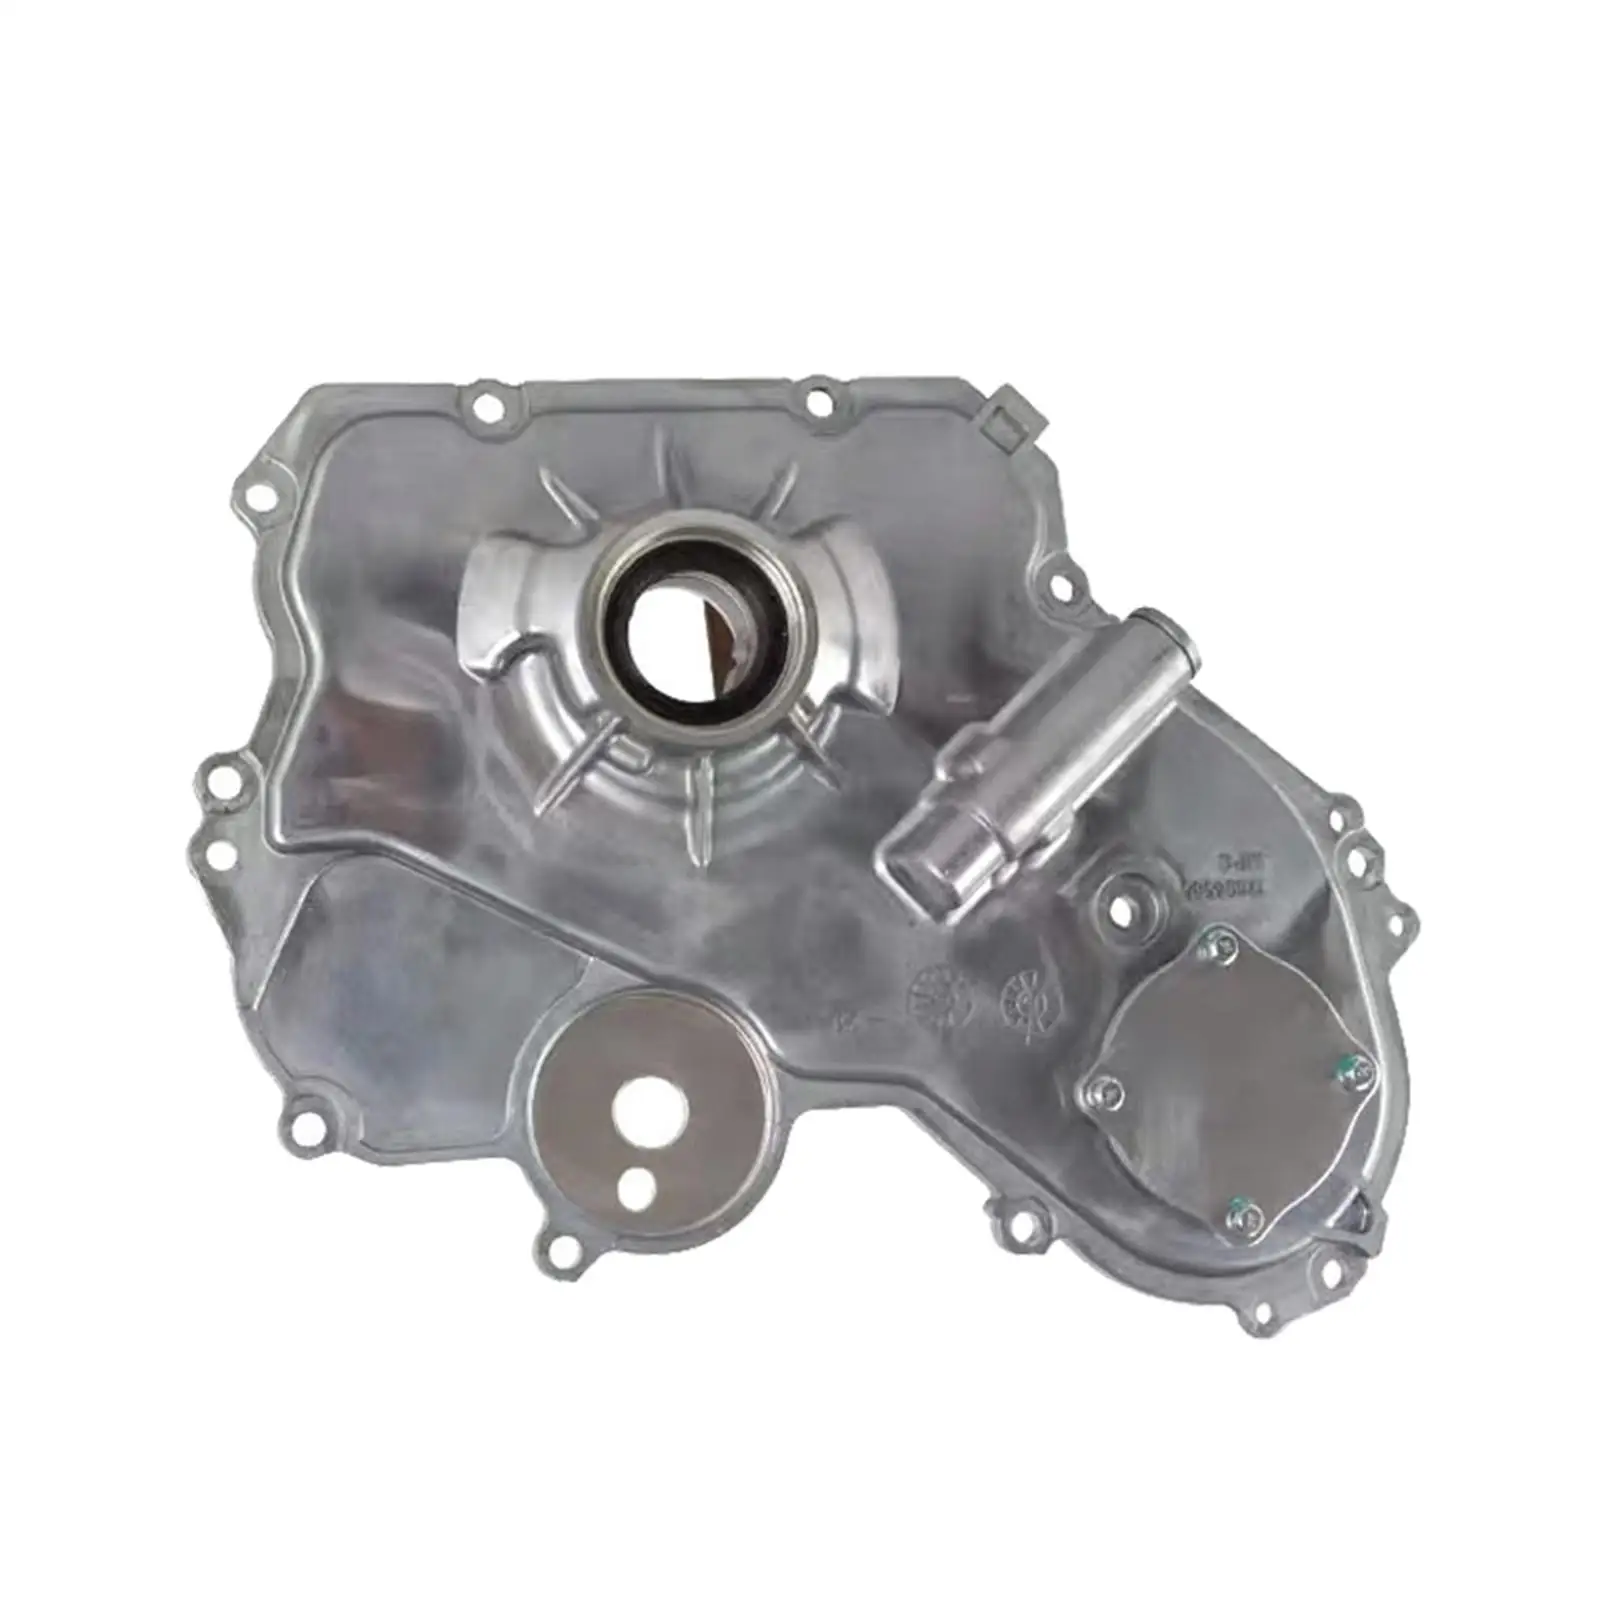 12584621 Engine Oil Pump Replaces Parts Replacement 12637040